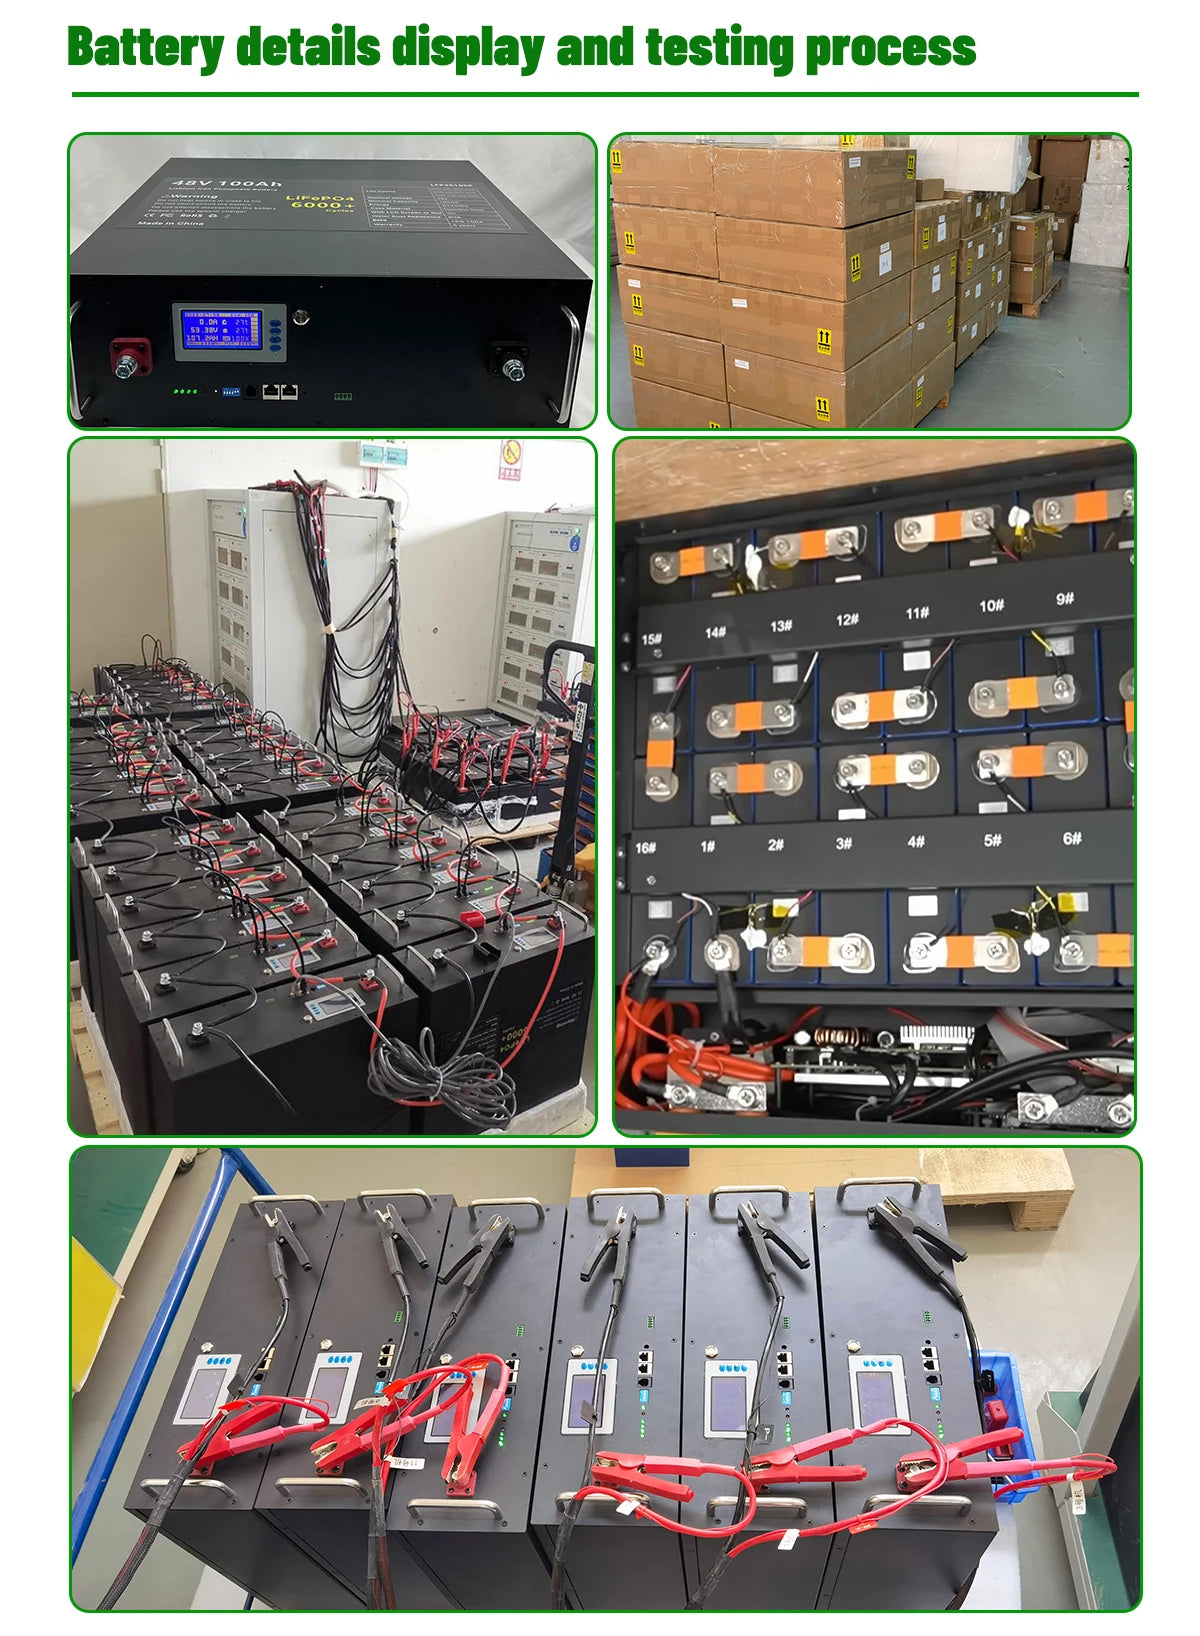 LiFePO4 48V 100AH Battery, Battery testing features: PC control, serial communication, and display/testing process for monitoring performance and status.